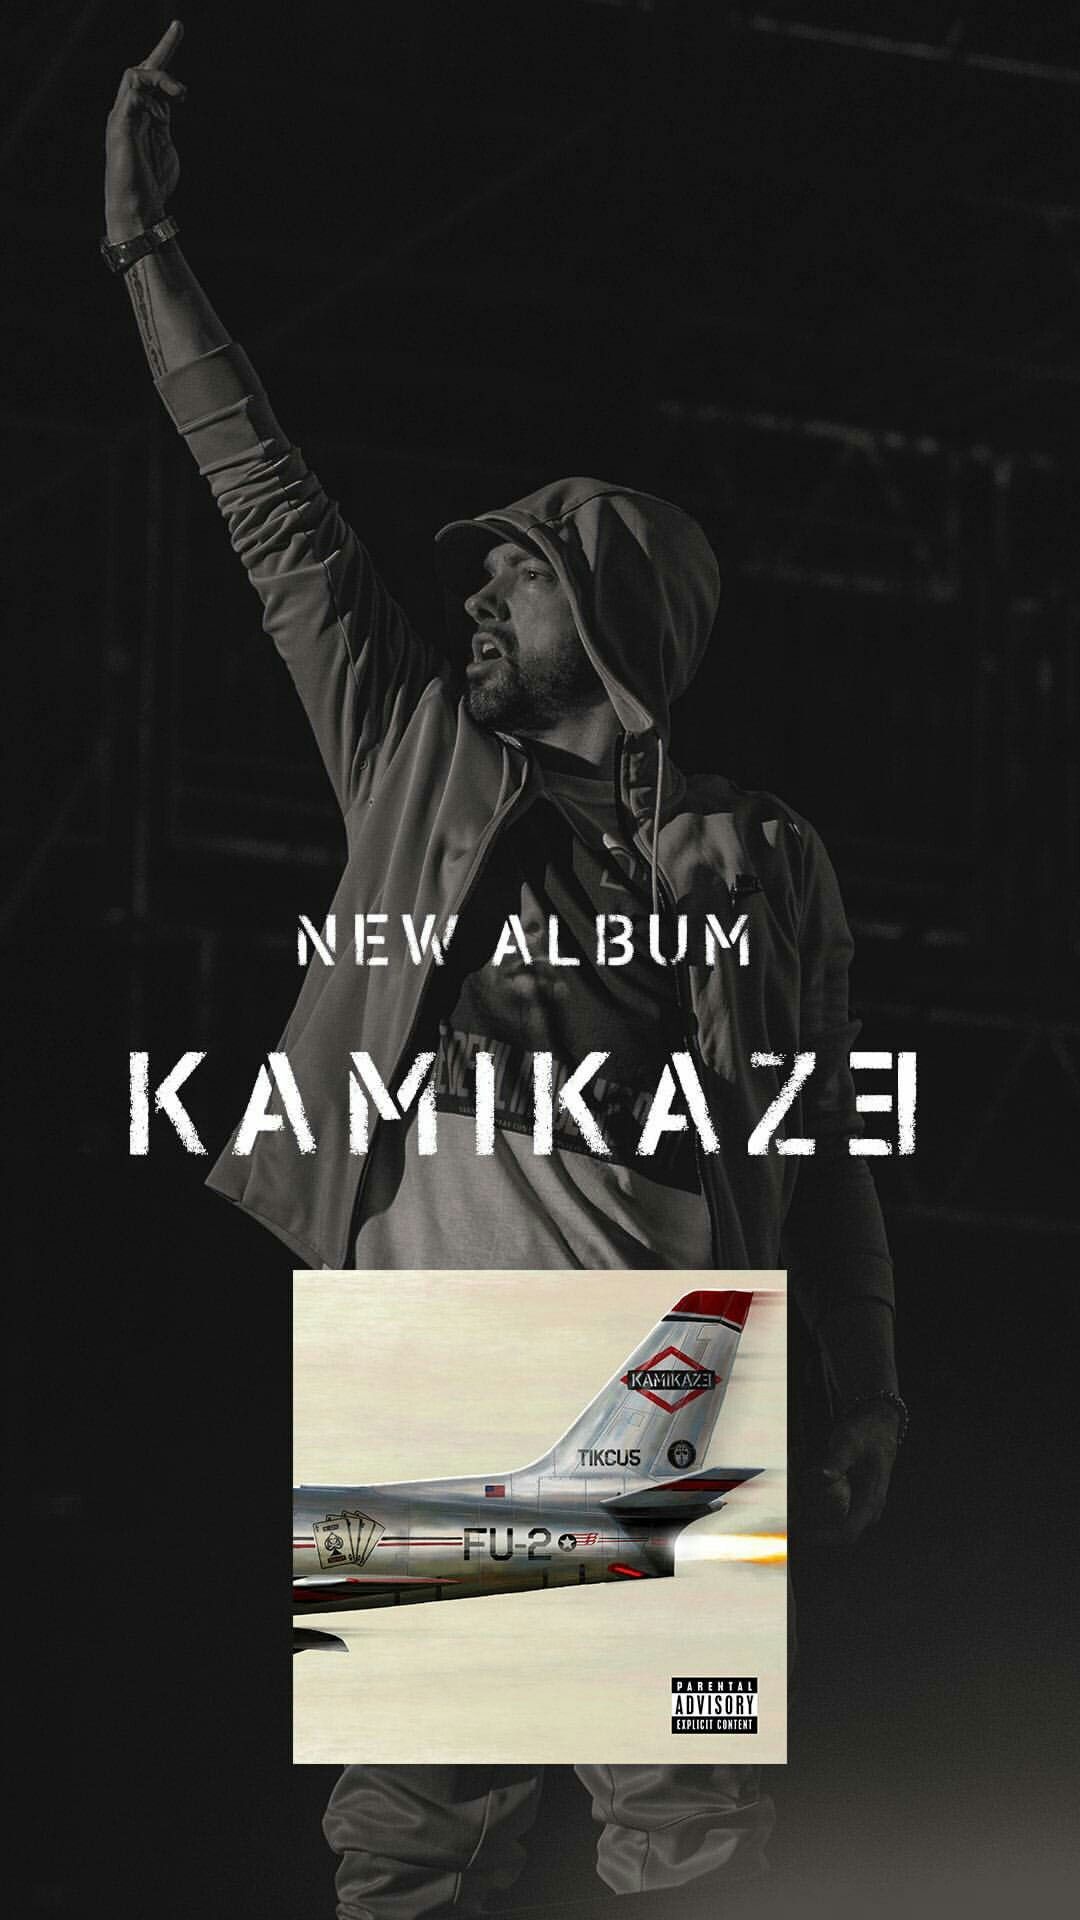 kamikaze wallpaper,poster,airplane,font,airline,photography